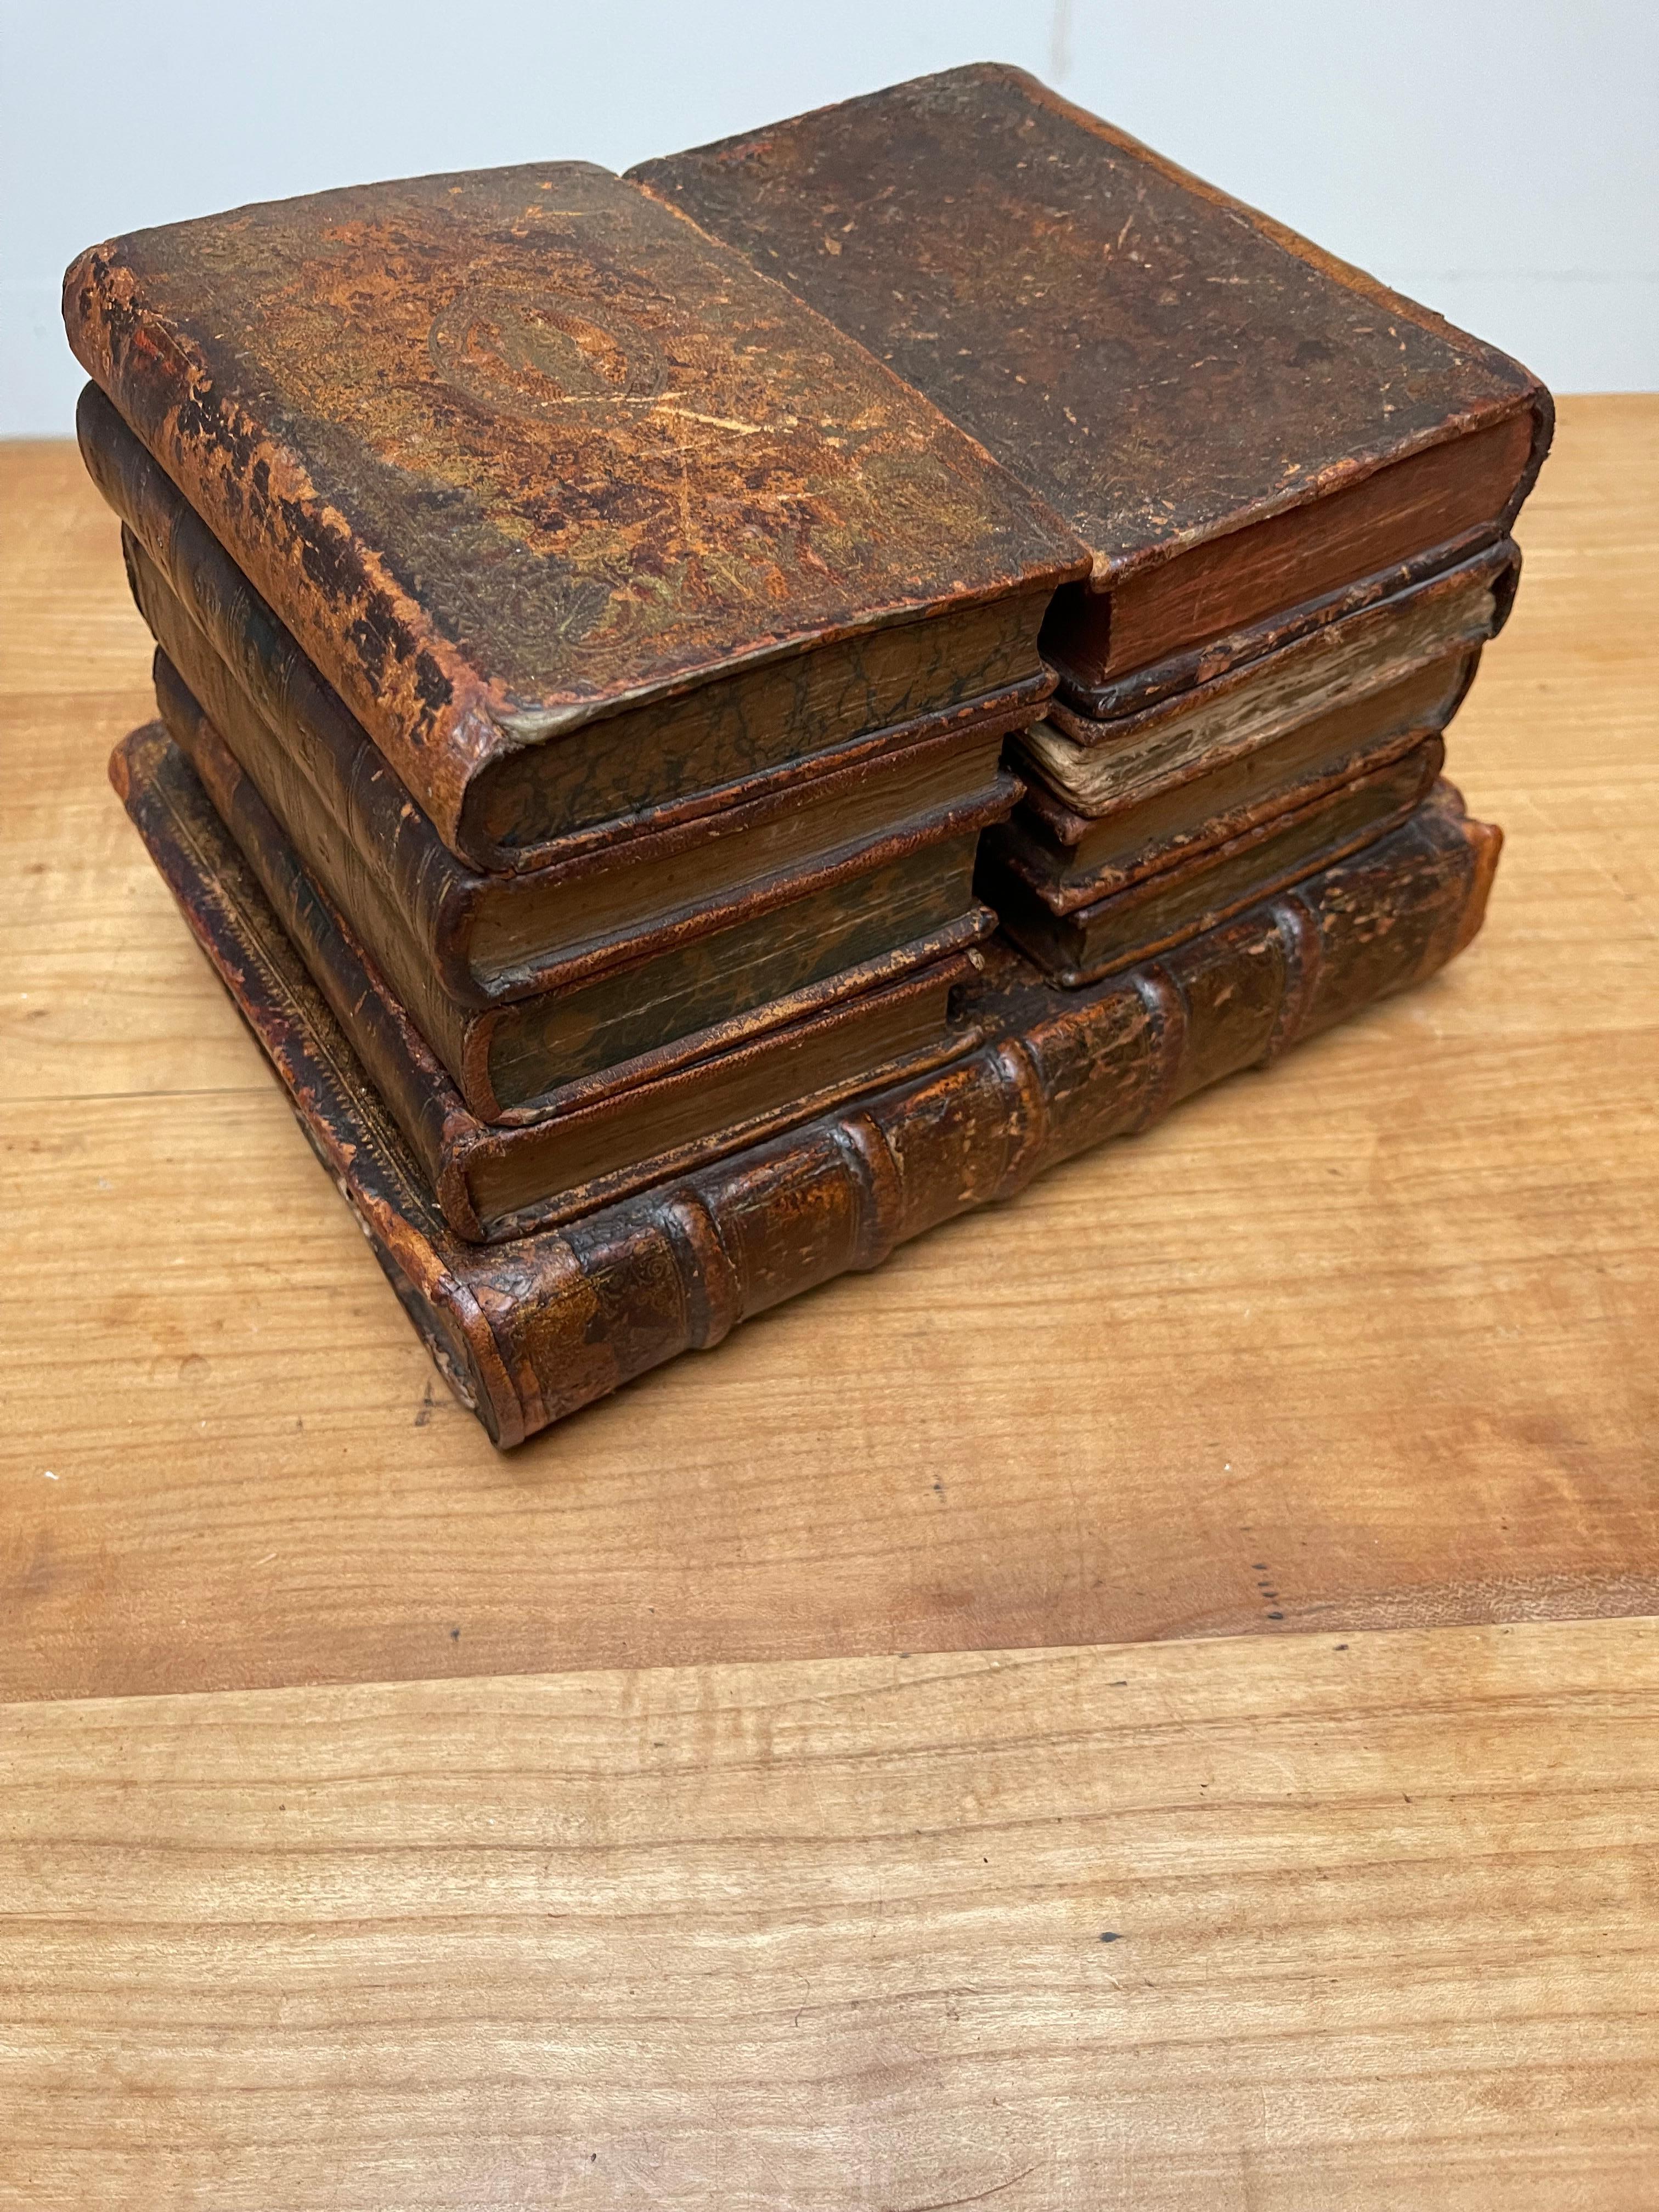 Rare French Mid-1800s Liquor Tantalus Drinks Box w. Two Stacks of Leather Books 4